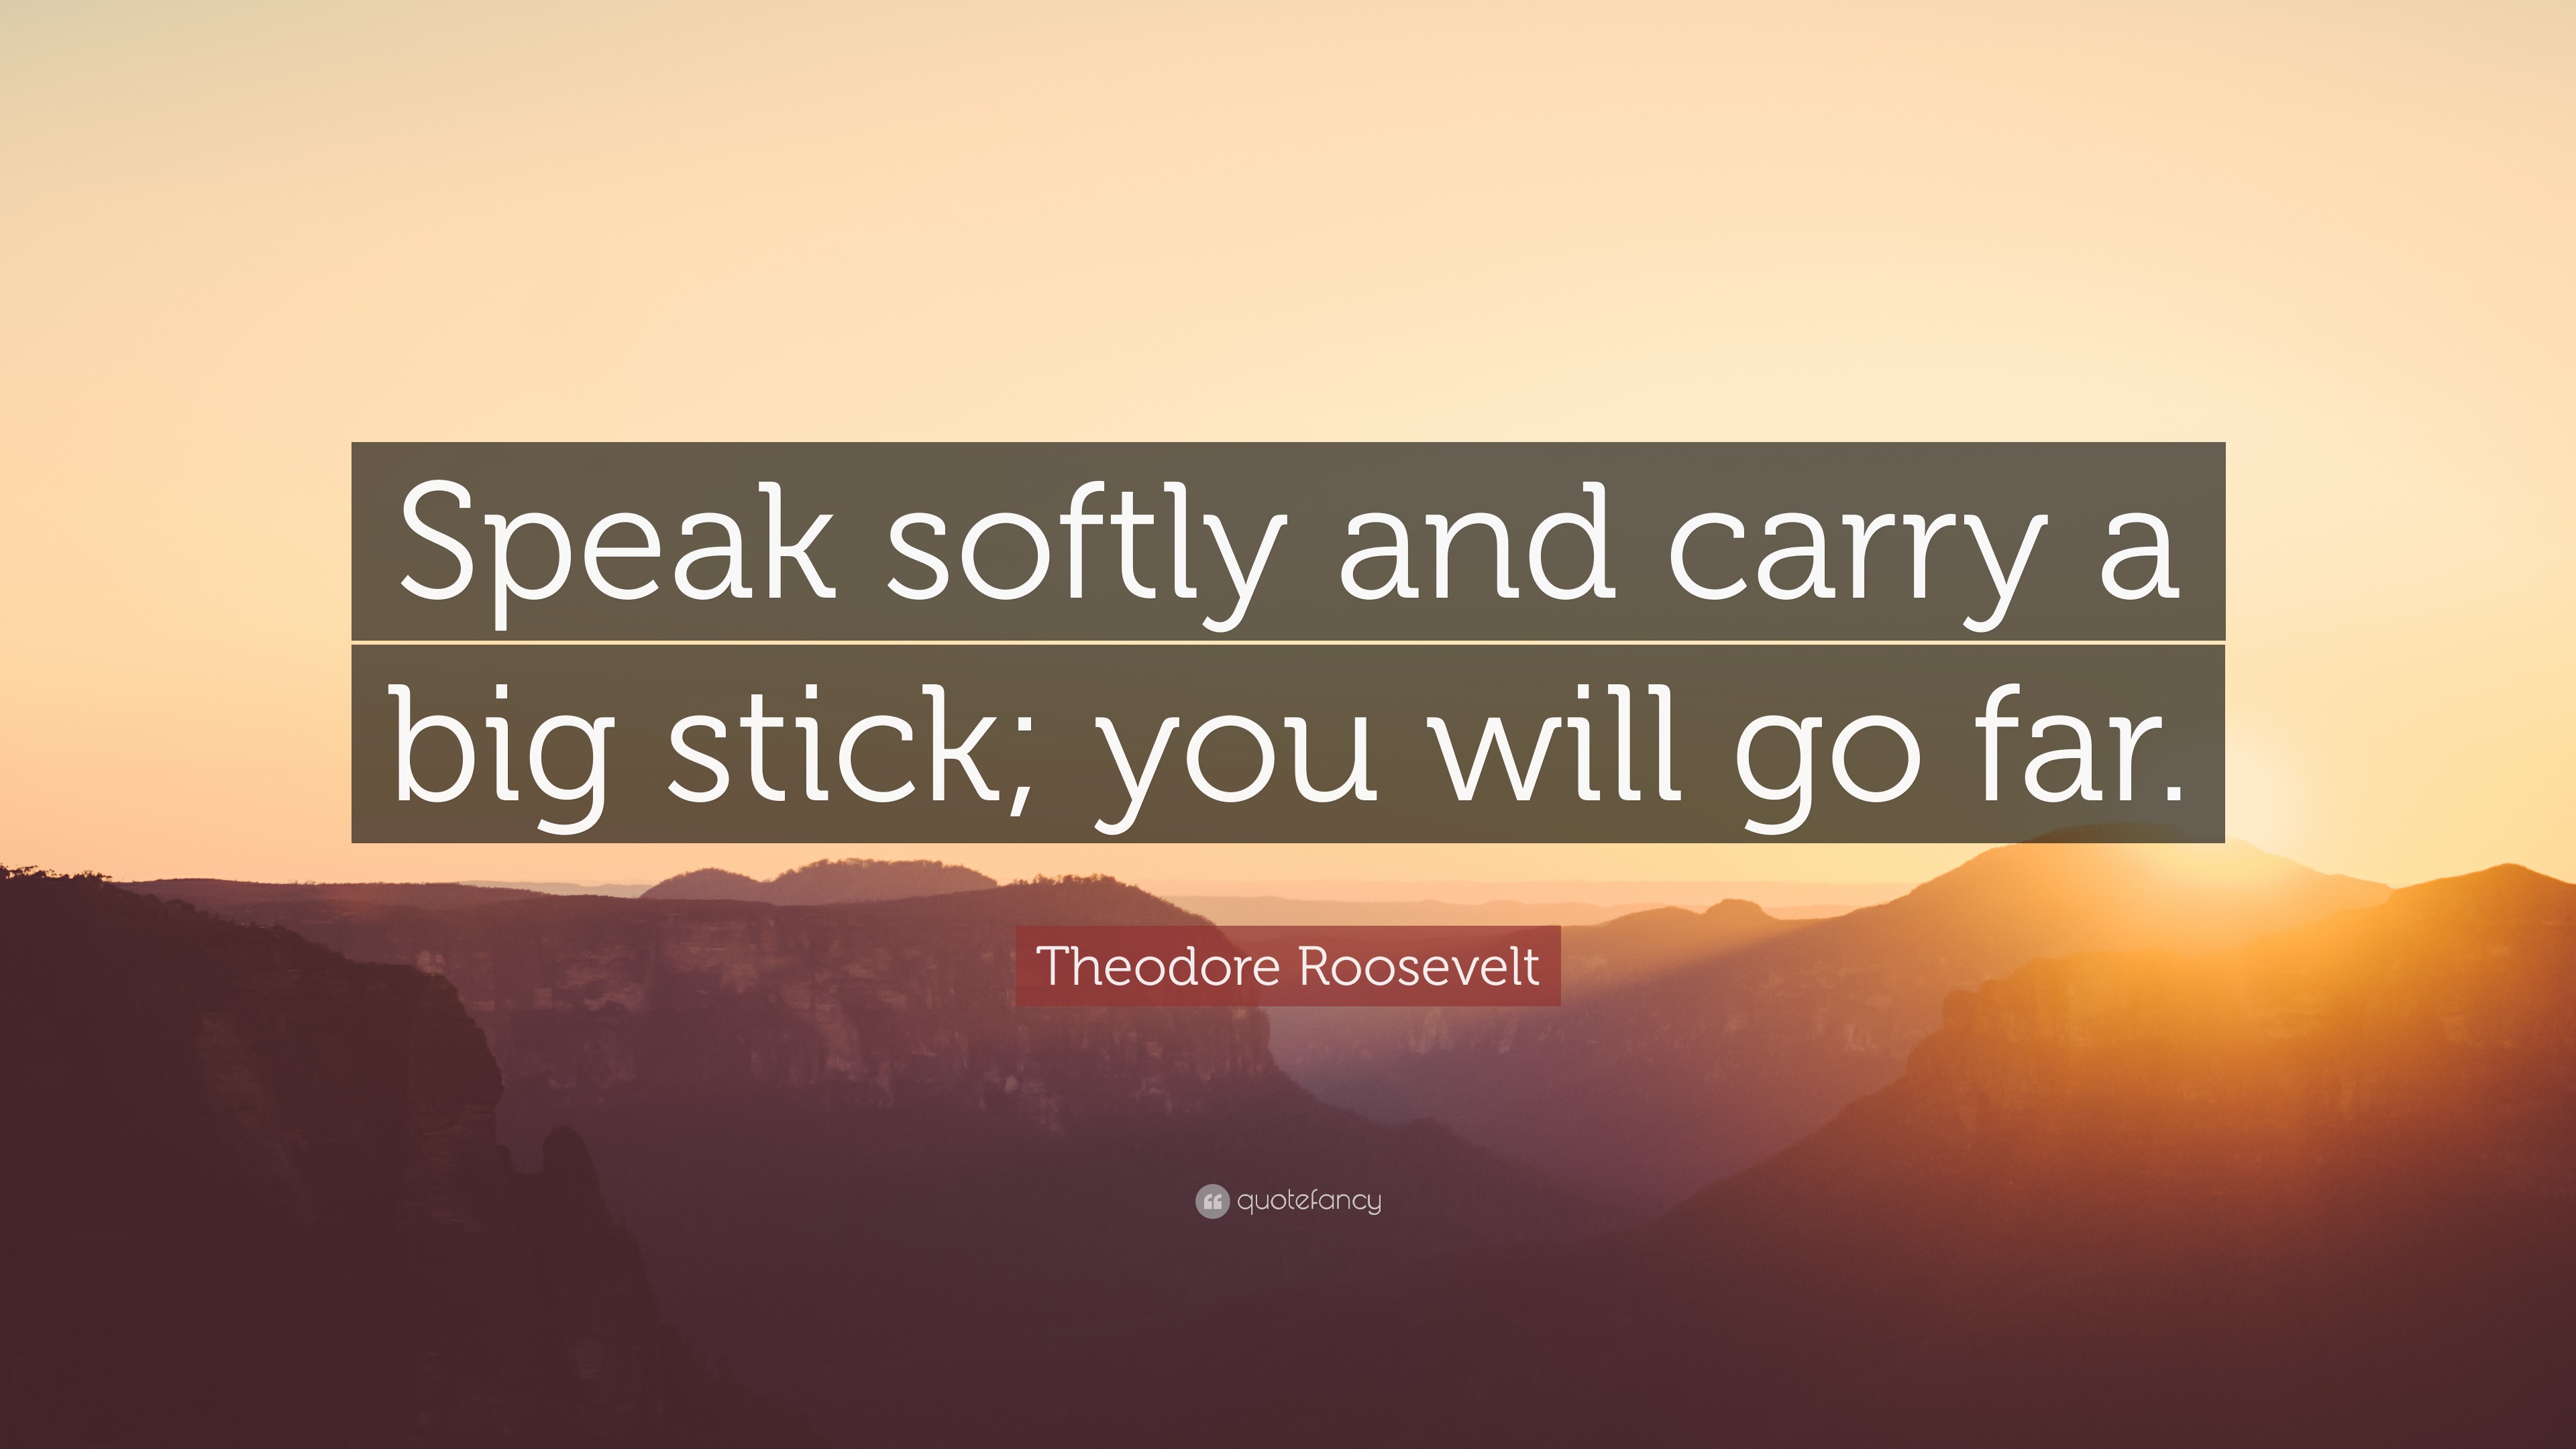 speak softly and carry a big stick quote